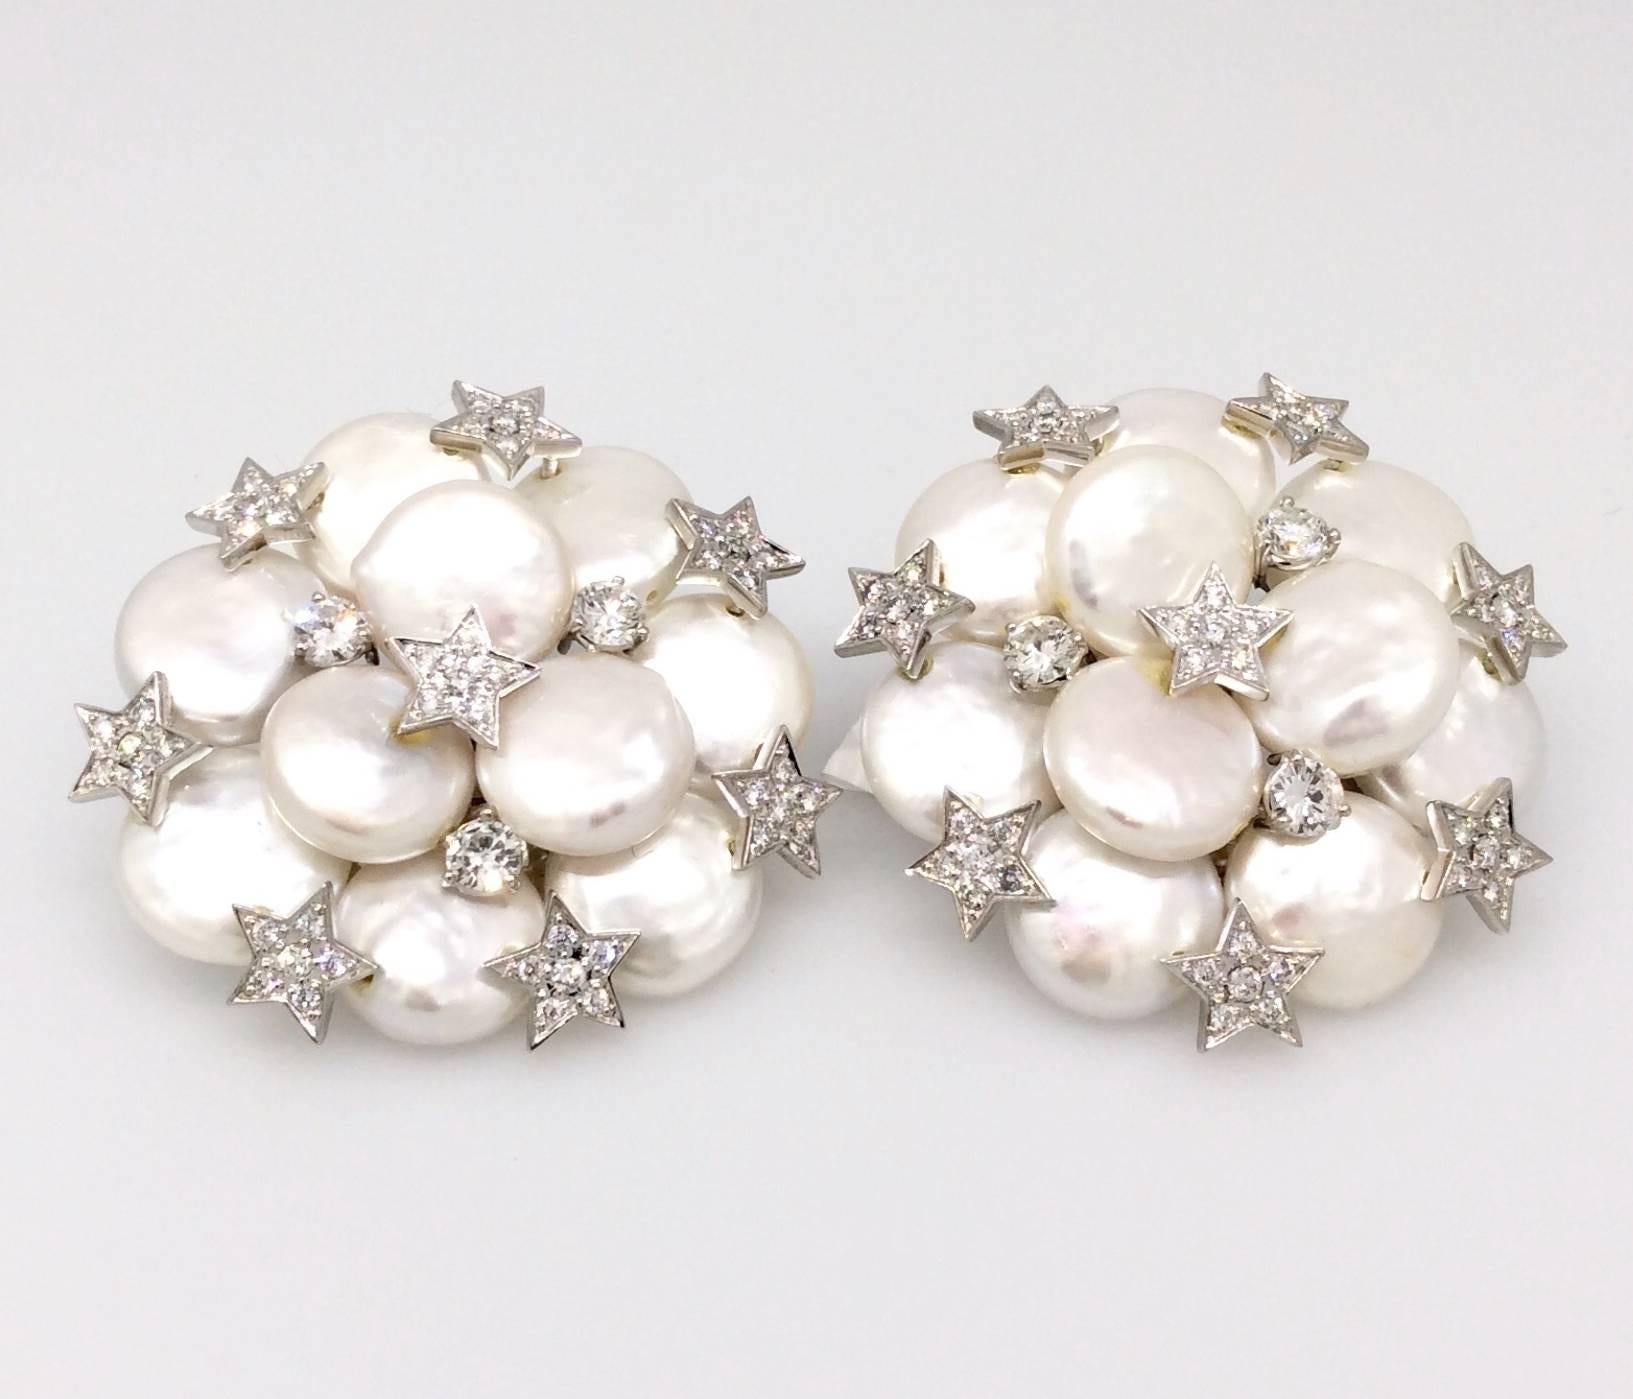  Button Pearl Diamond Gold Cluster Earrings with Diamond Stars 4